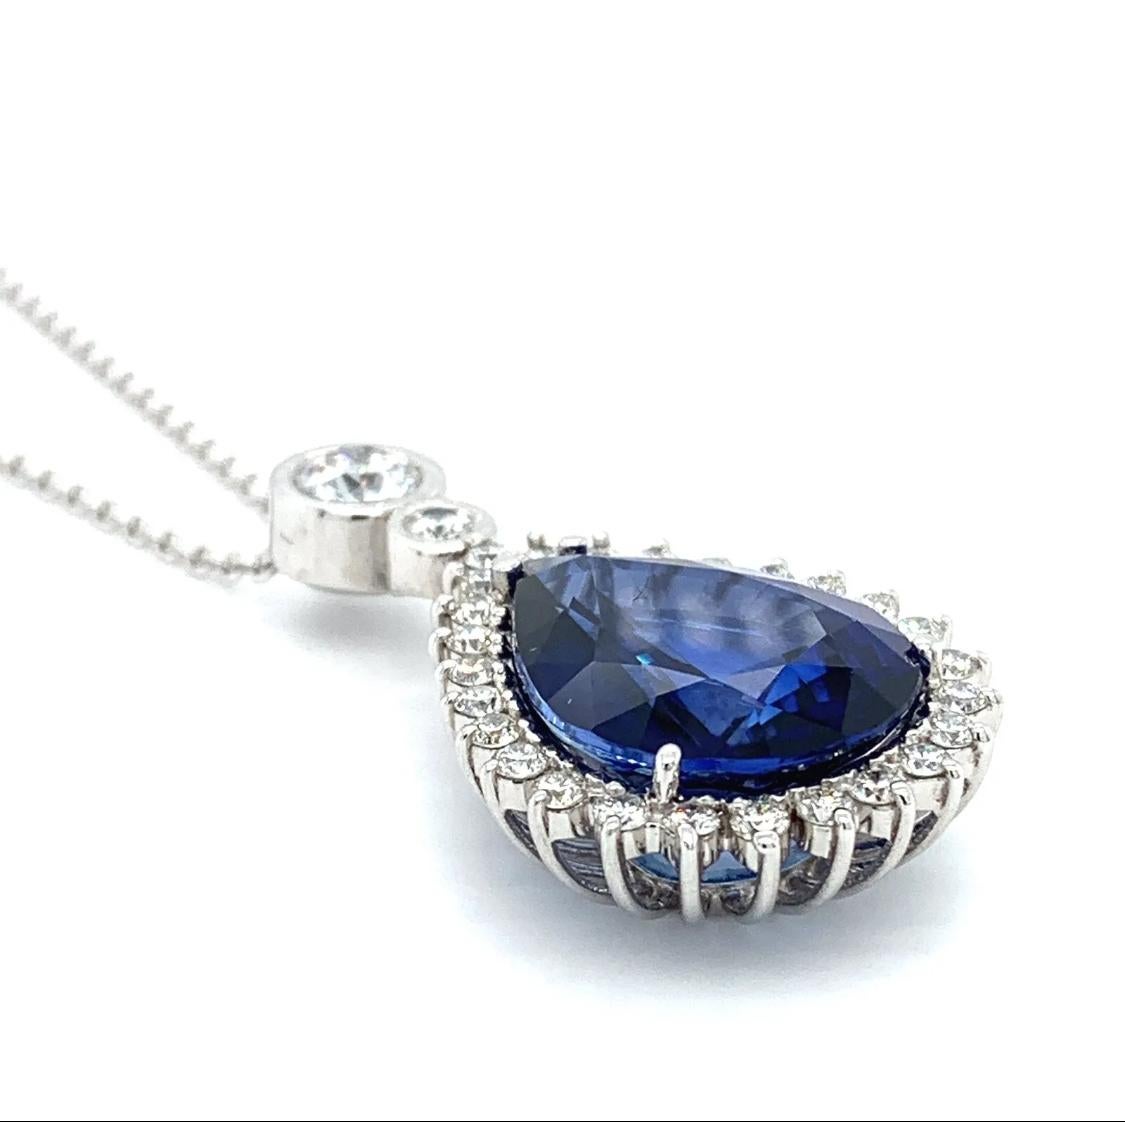 Sapphire and diamond art deco drop necklace 18k white gold
Sapphire and diamond halo cluster around art deco style drop necklace in 18k white gold
Sapphire treated gemstone pear shaped total weight approximately 10.00ct 
Diamonds F colour VS1